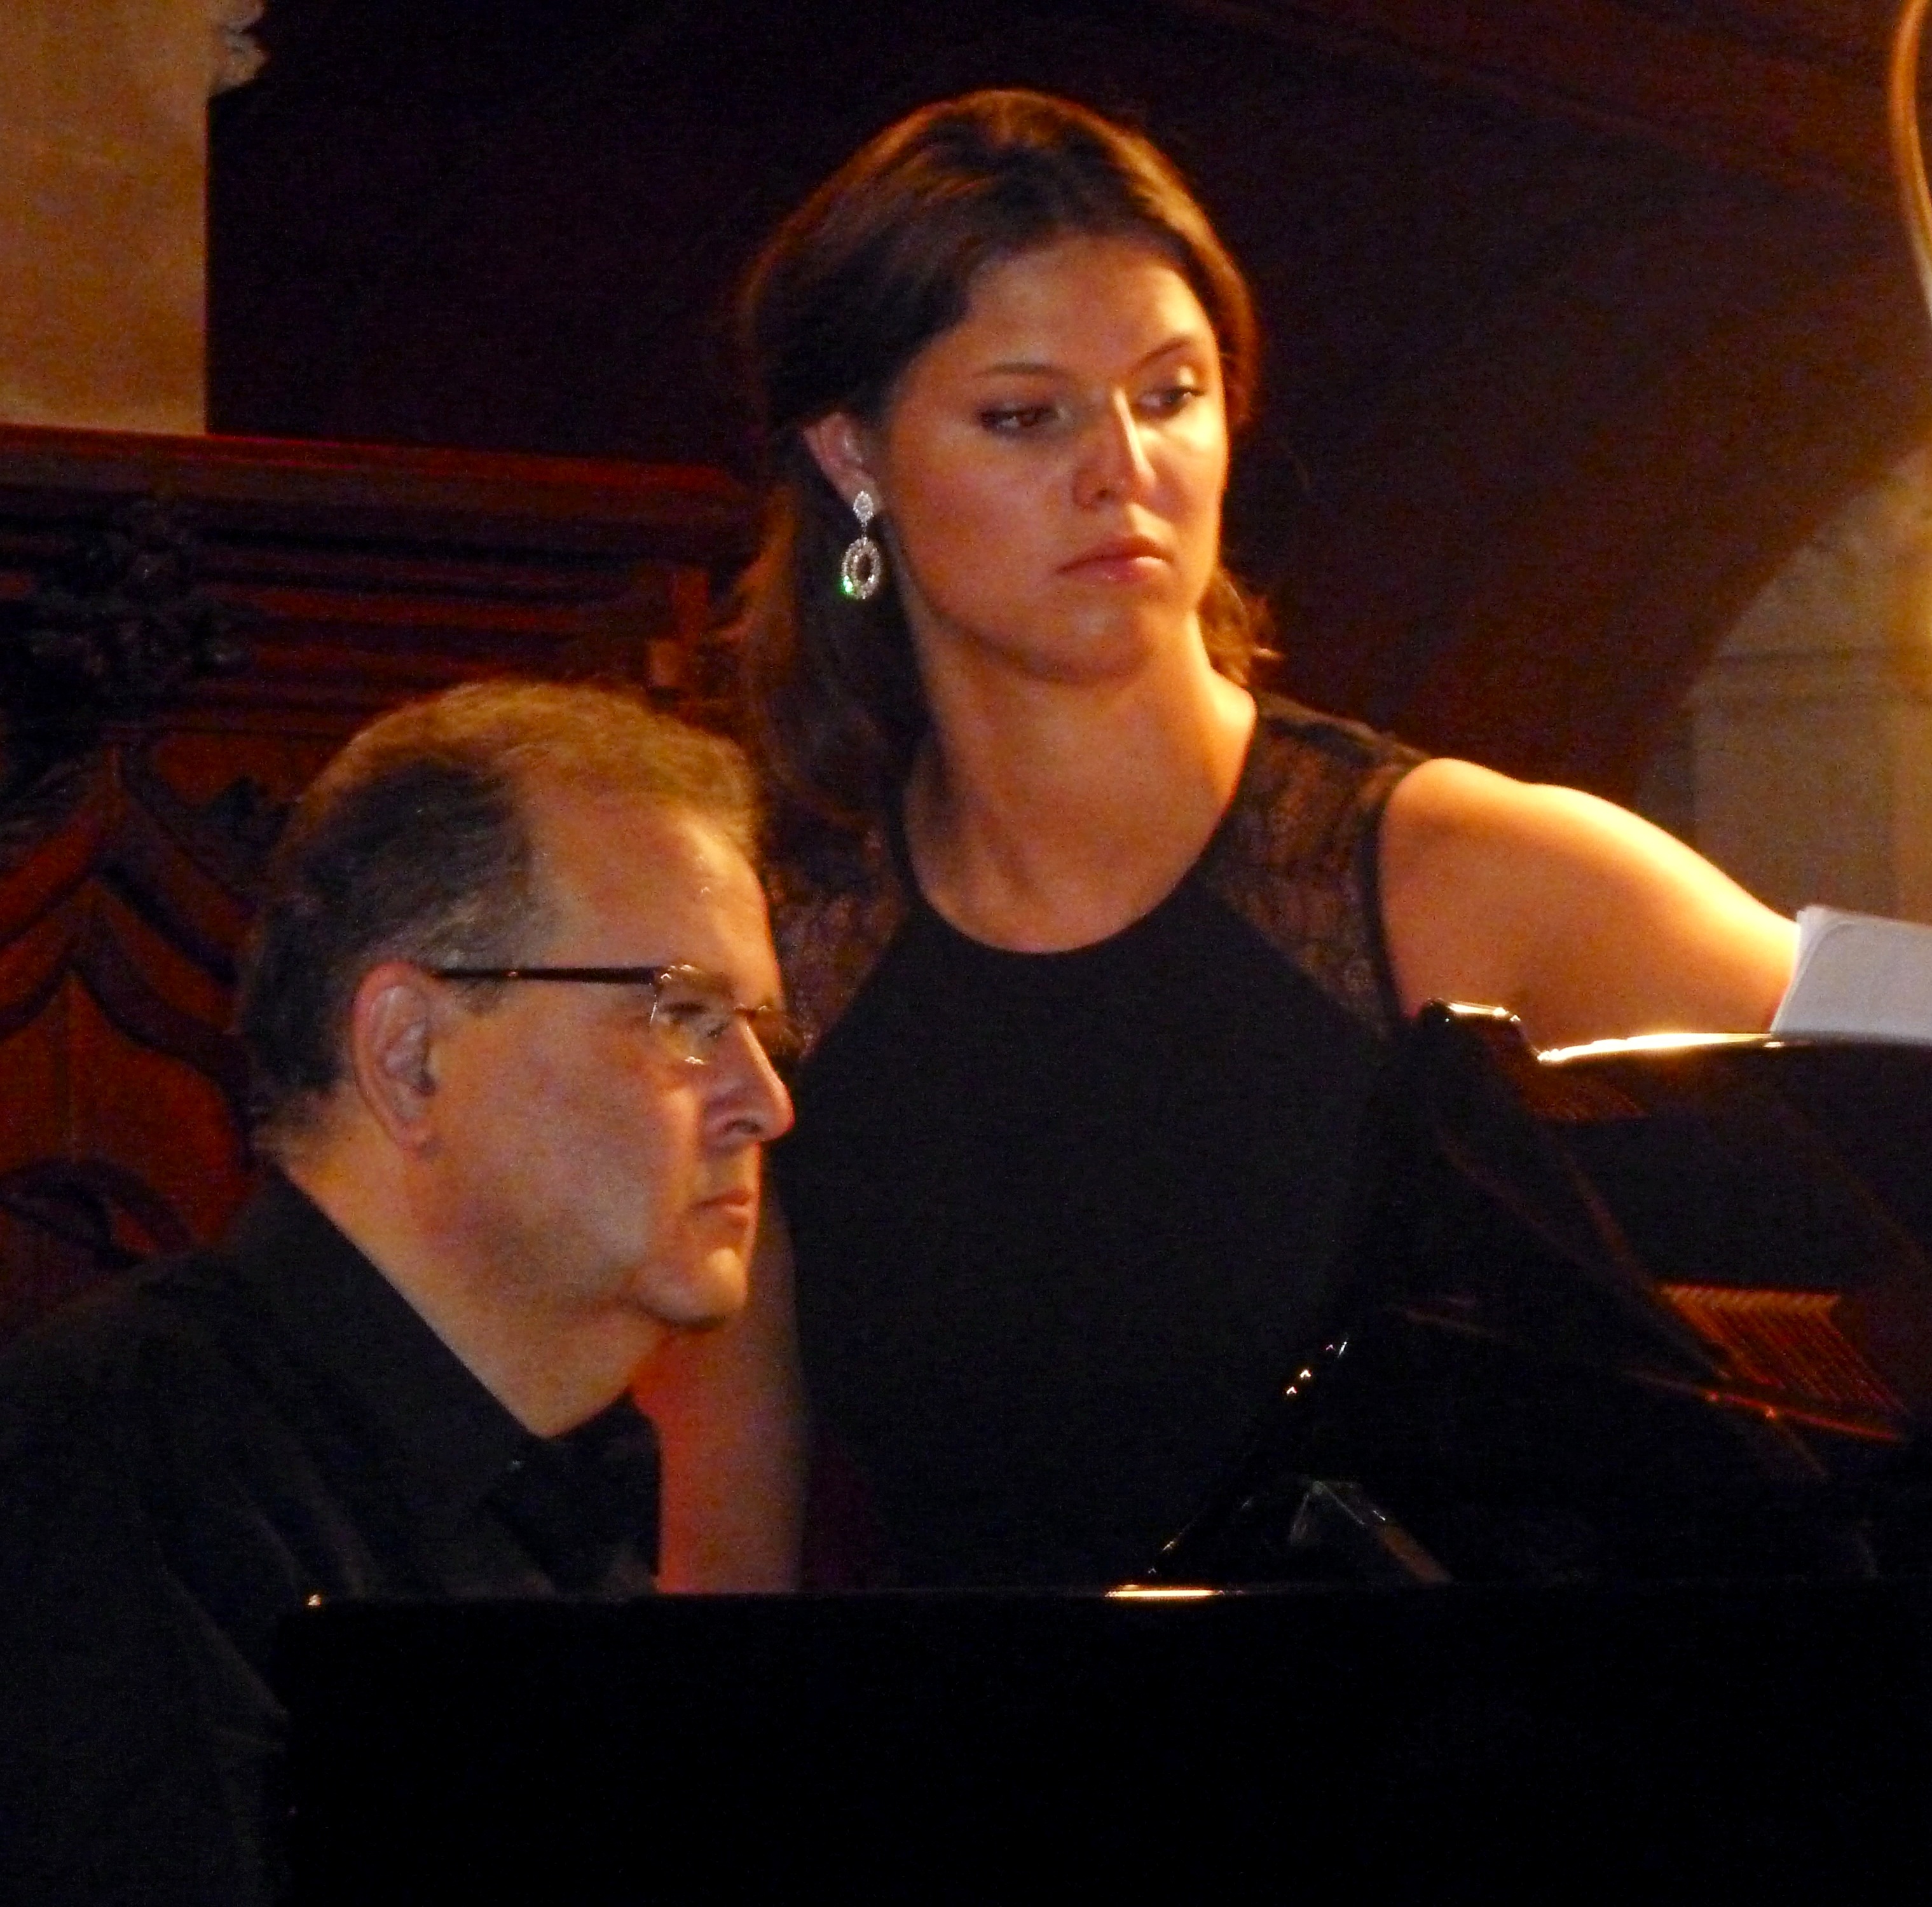 Chopin's Dream:  Daniel Blumenthal, piano and Jennifer Simpson, mezzo soprano at the Jenny Lind Gala Concert "The Dream of Chopin" in Malvern, UK on 13 July 2013 staged by Icons of Europe.